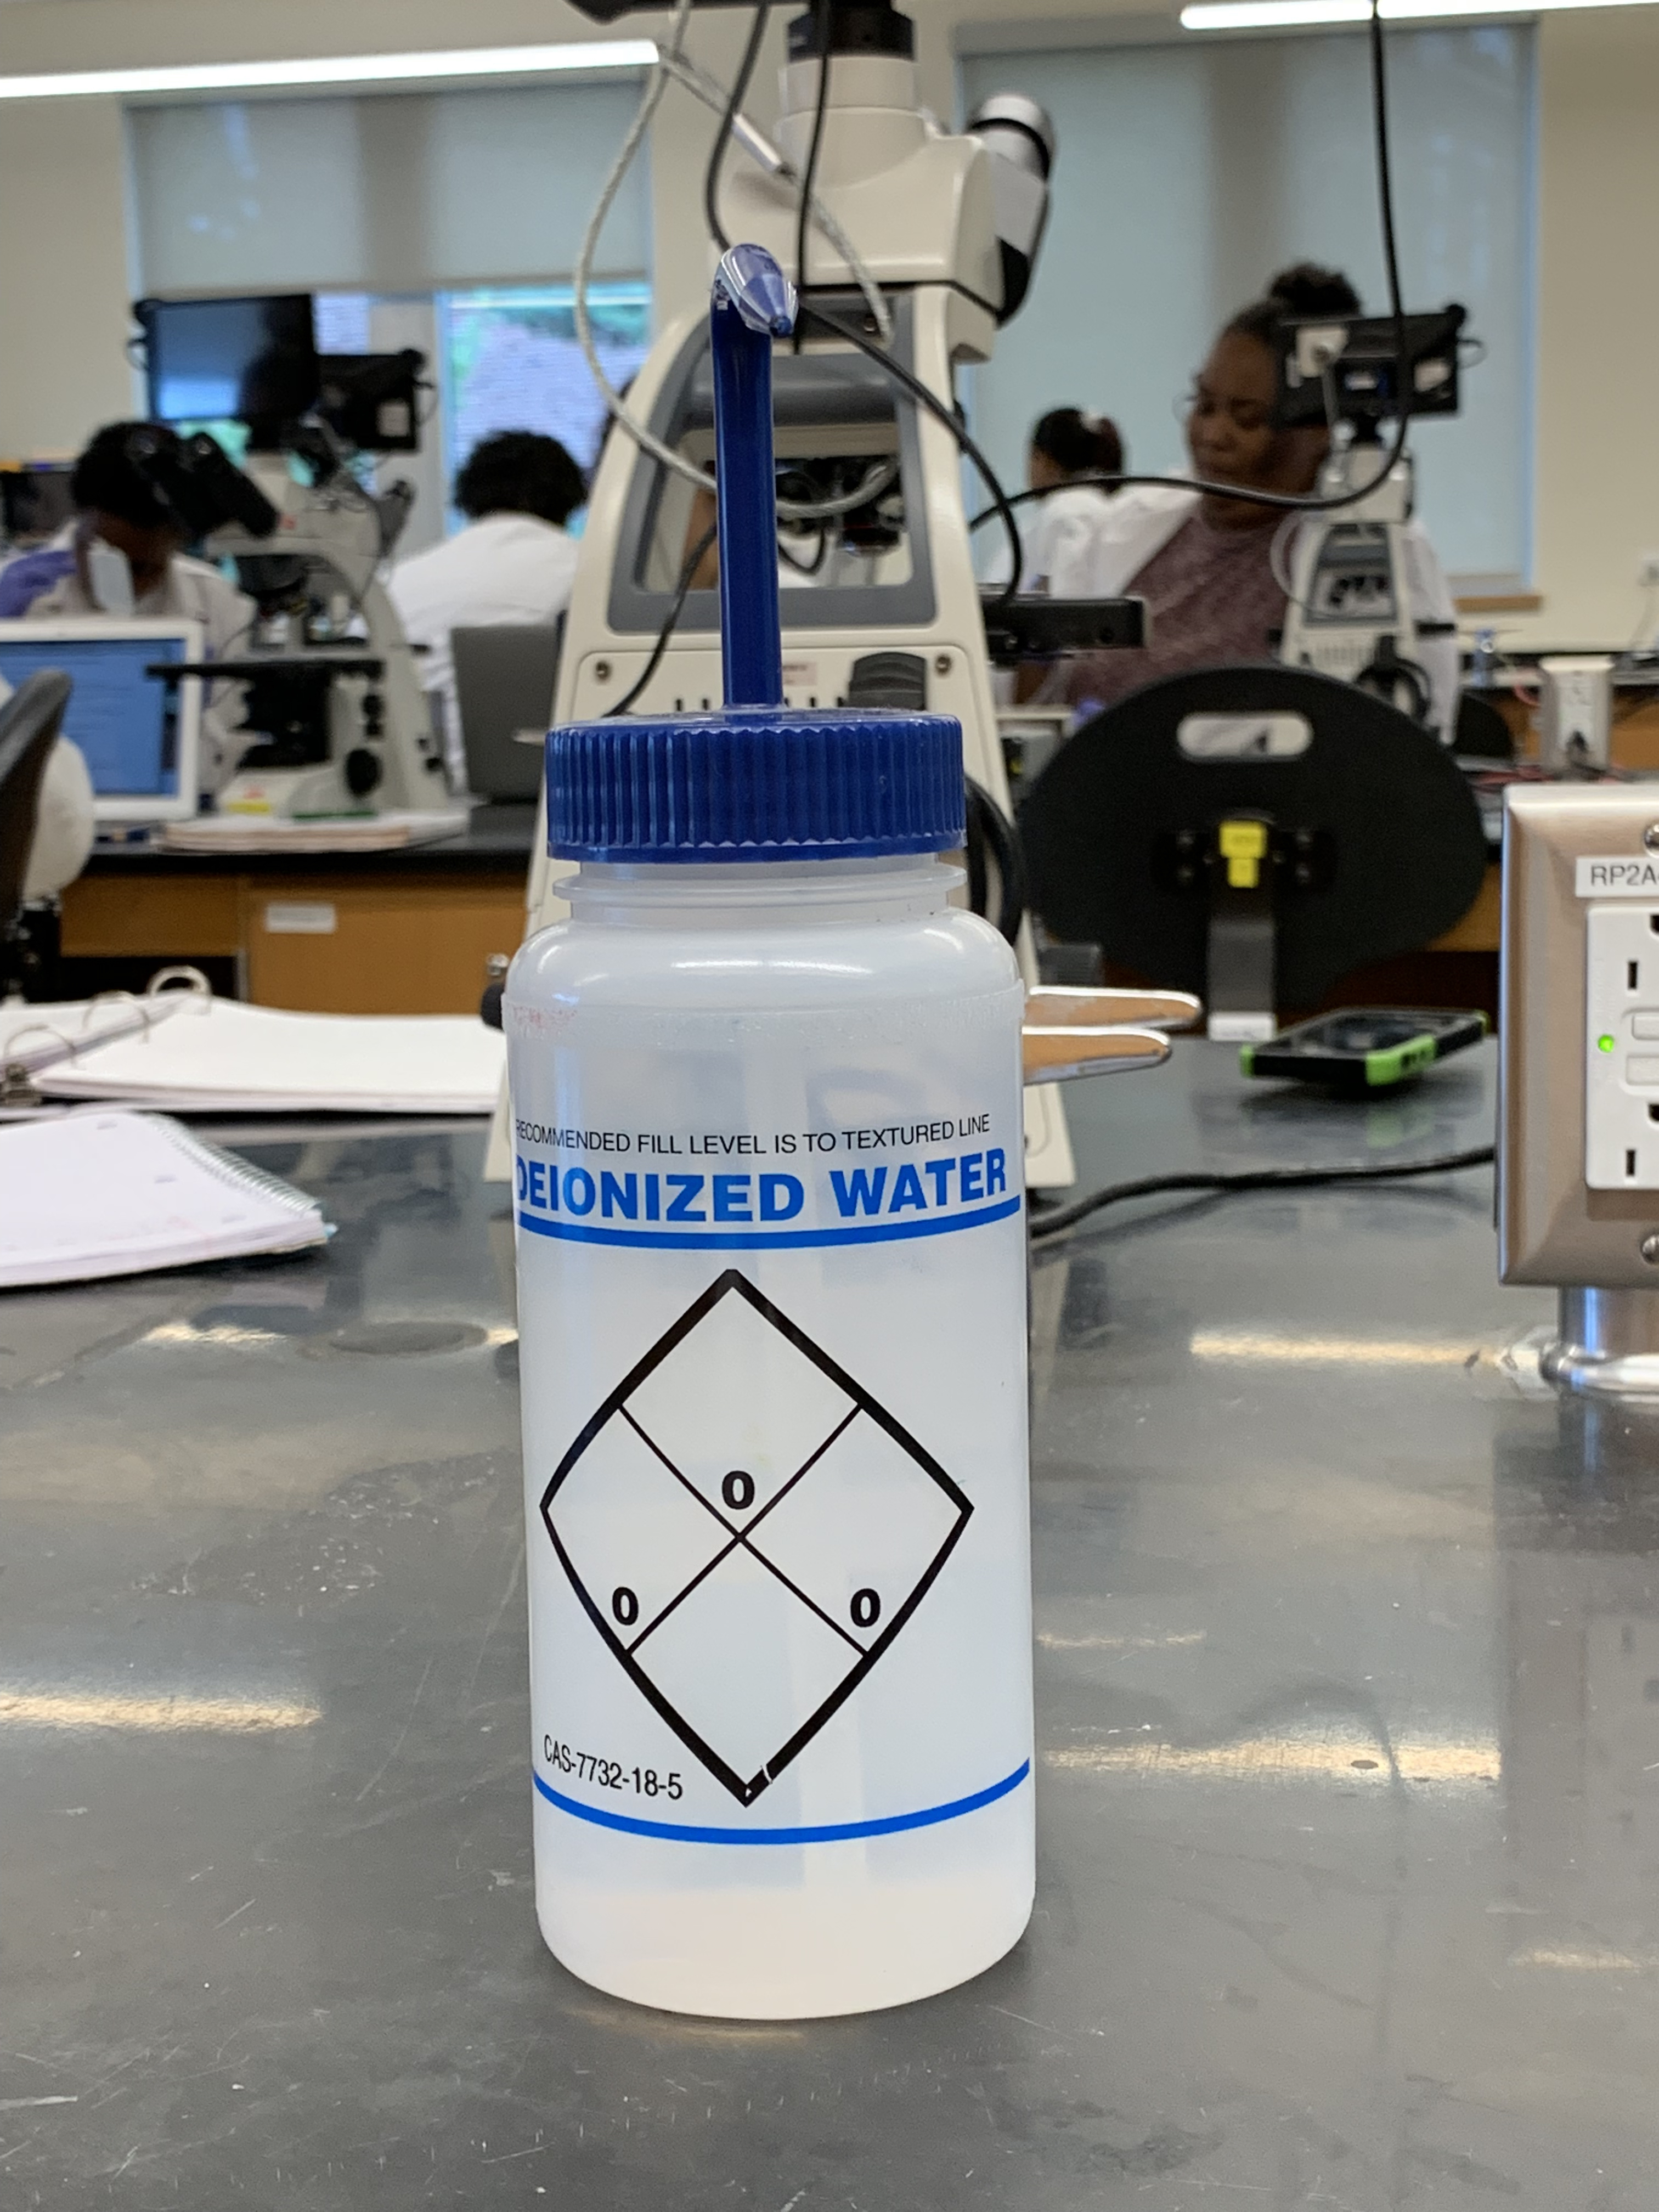 Bottle containing deionized water for use in the experiments.